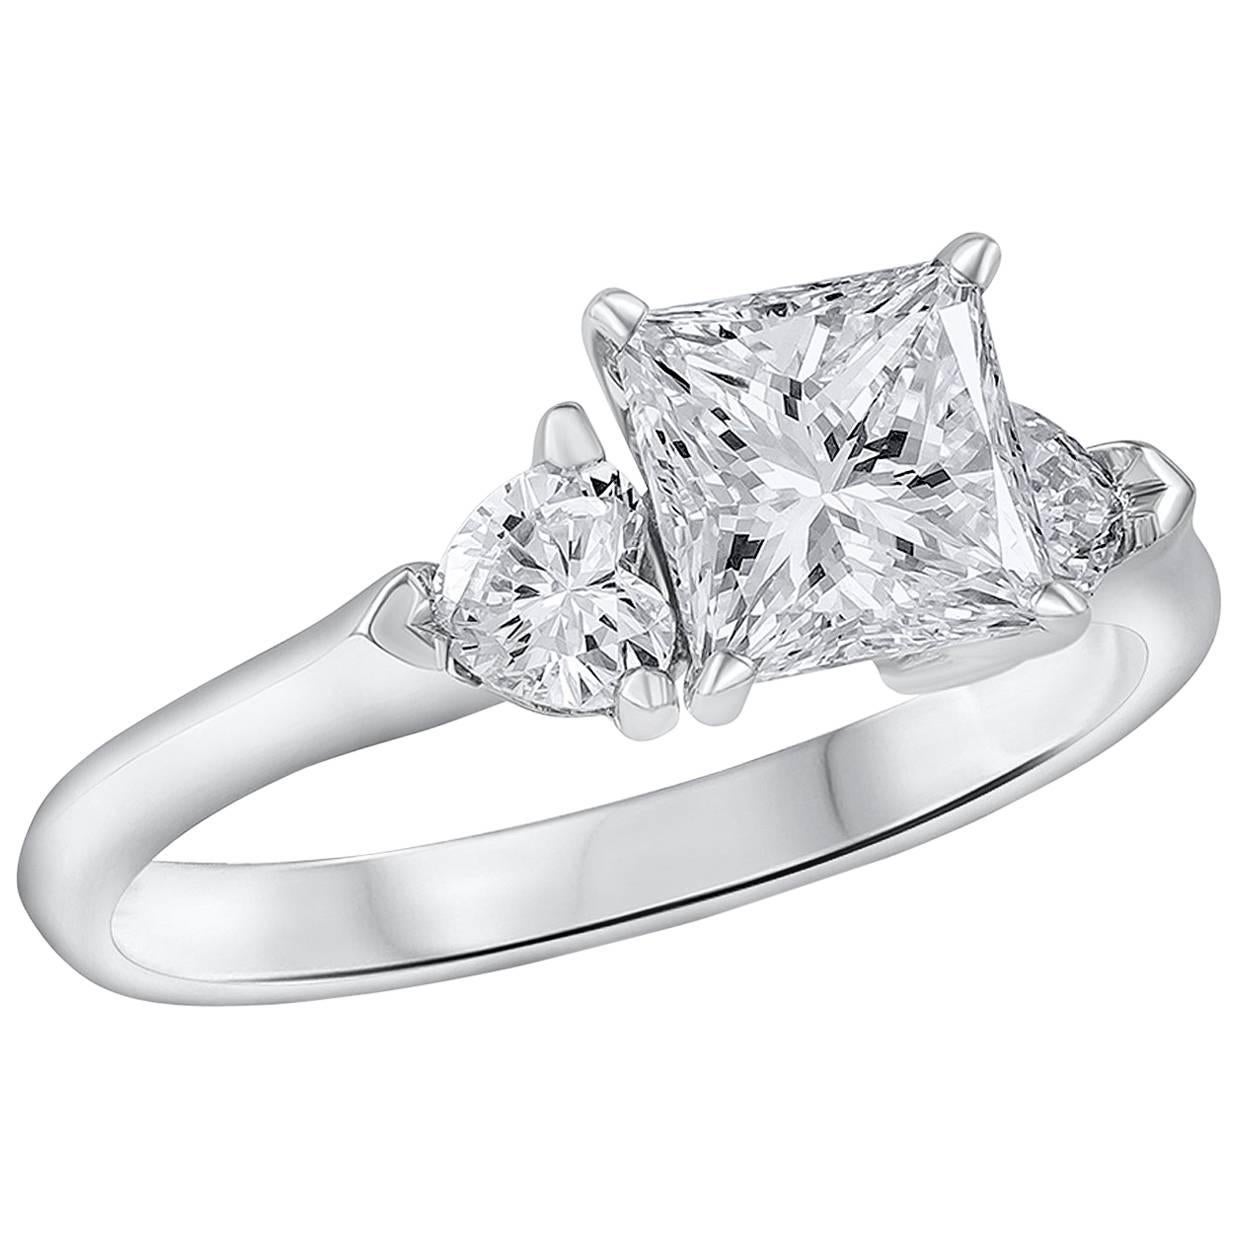 Showcases a 1.32 carats princess cut diamond flanked by a heart shape diamond on each side. The heart shape diamonds symbolize the two hearts that join together in the momentous event of an engagement. GIA certified the center stone as I color, VVS2